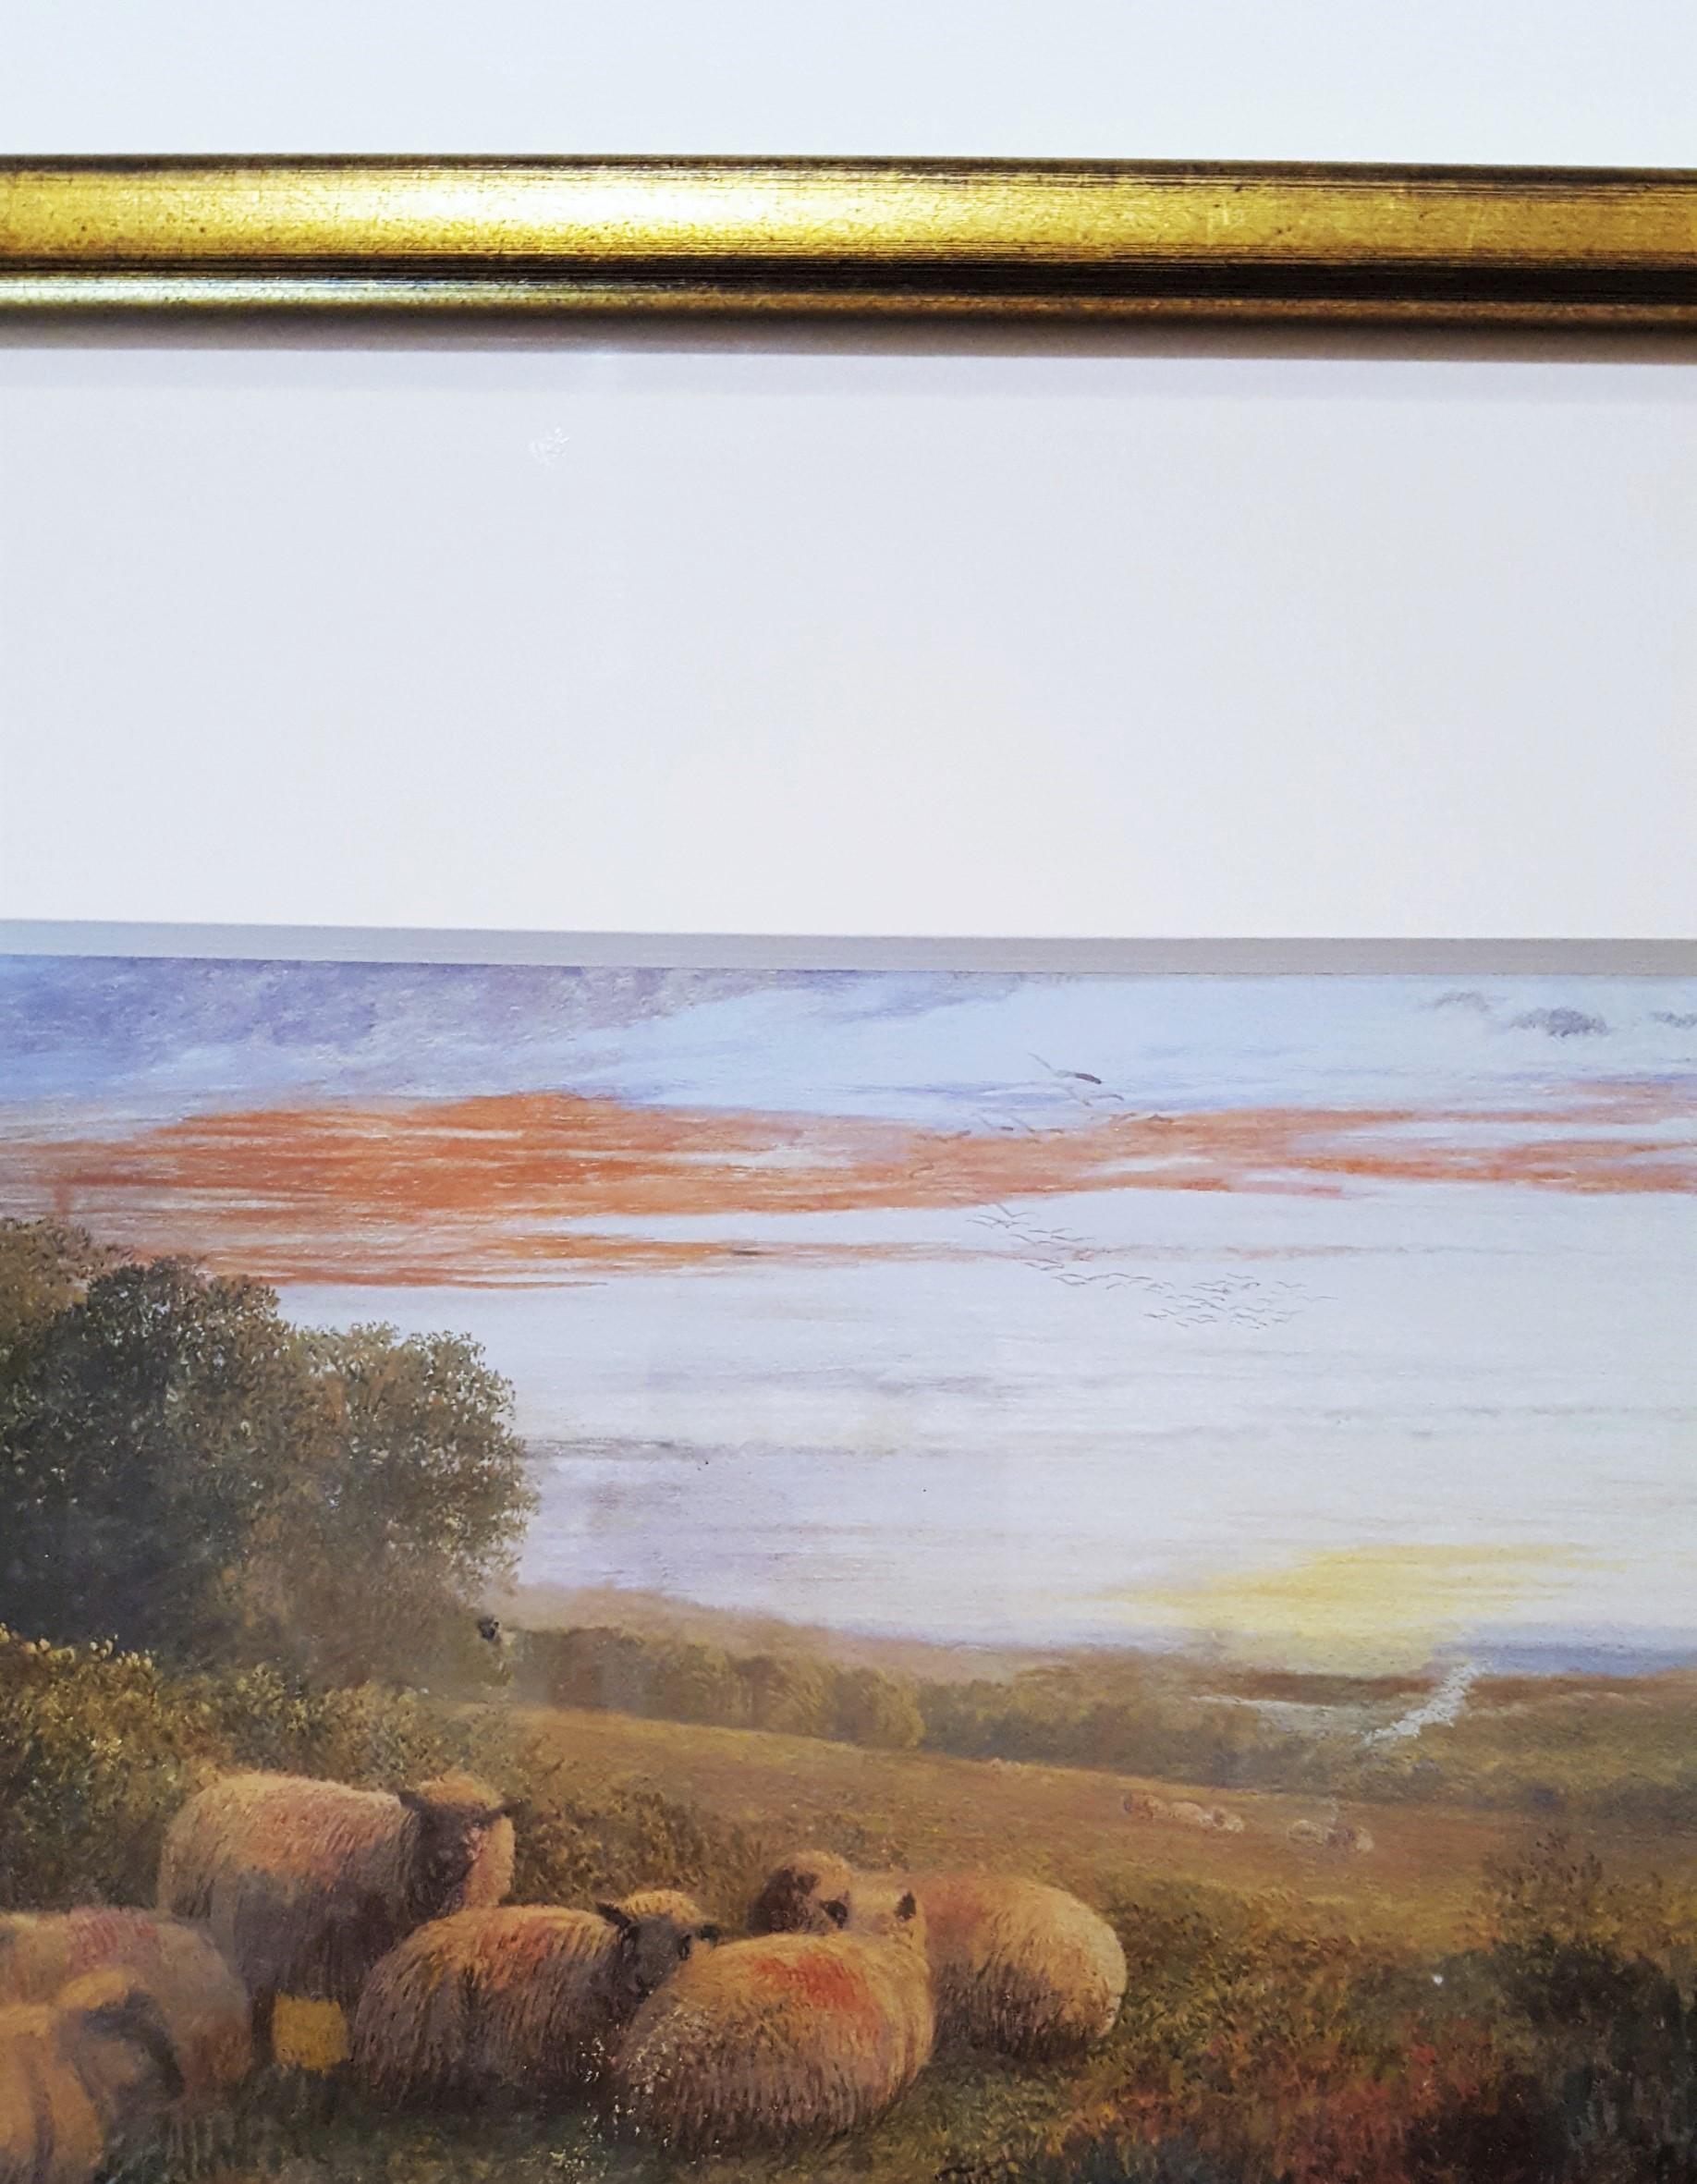 An original signed watercolor/gouache on paper by English artist George Shalders (1826-1873) titled 